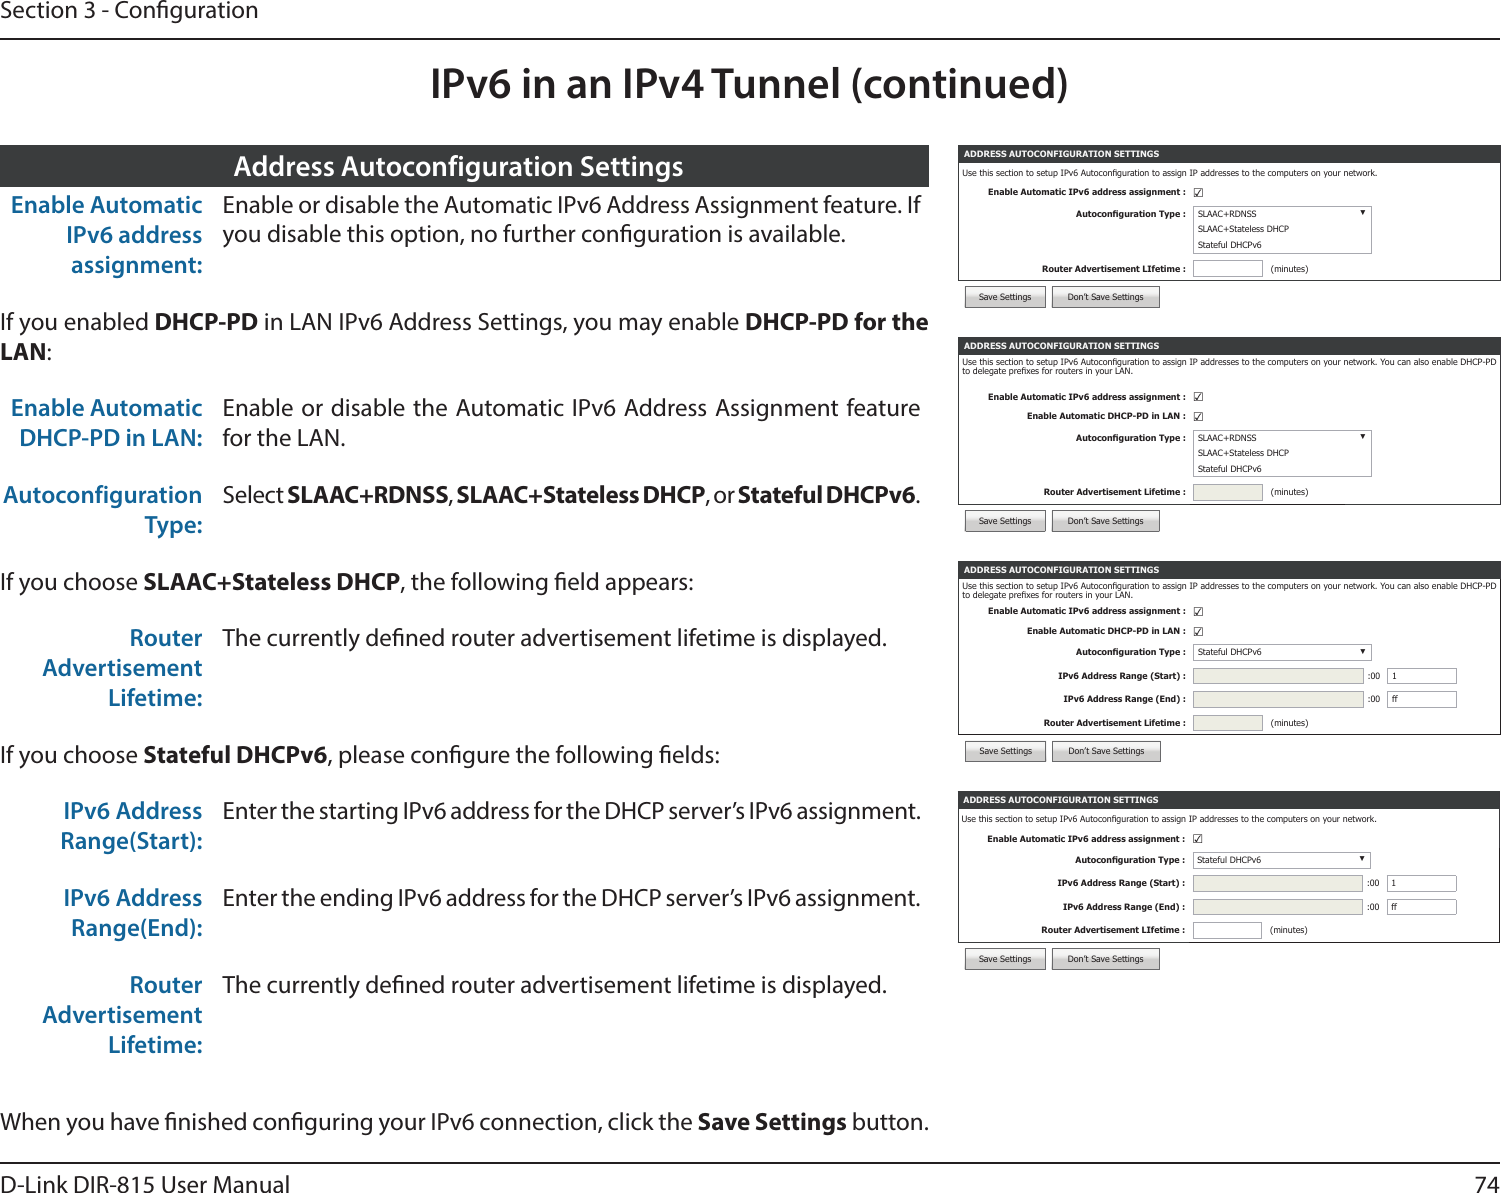 74D-Link DIR-815 User ManualSection 3 - CongurationIPv6 in an IPv4 Tunnel (continued)ADDRESS AUTOCONFIGURATION SETTINGSUse this section to setup IPv6 Autoconguration to assign IP addresses to the computers on your network. You can also enable DHCP-PD to delegate prexes for routers in your LAN.Enable Automatic IPv6 address assignment : ☑Enable Automatic DHCP-PD in LAN : ☑Autoconguration Type : Stateful DHCPv6 ▼IPv6 Address Range (Start) : :00 1IPv6 Address Range (End) : :00 ffRouter Advertisement Lifetime : (minutes)Save Settings Don’t Save SettingsEnable Automatic IPv6 address assignment:Enable or disable the Automatic IPv6 Address Assignment feature. If you disable this option, no further conguration is available.If you enabled DHCP-PD in LAN IPv6 Address Settings, you may enable DHCP-PD for the LAN:Enable Automatic DHCP-PD in LAN:Enable or disable the Automatic IPv6 Address Assignment feature for the LAN.Autoconfiguration Type:Select SLAAC+RDNSS, SLAAC+Stateless DHCP, or Stateful DHCPv6.If you choose SLAAC+Stateless DHCP, the following eld appears:Router Advertisement Lifetime:The currently dened router advertisement lifetime is displayed.If you choose Stateful DHCPv6, please congure the following elds:IPv6 Address Range(Start):Enter the starting IPv6 address for the DHCP server’s IPv6 assignment.IPv6 Address Range(End):Enter the ending IPv6 address for the DHCP server’s IPv6 assignment.Router Advertisement Lifetime:The currently dened router advertisement lifetime is displayed.Address Autoconfiguration SettingsADDRESS AUTOCONFIGURATION SETTINGSUse this section to setup IPv6 Autoconguration to assign IP addresses to the computers on your network. You can also enable DHCP-PD to delegate prexes for routers in your LAN.Enable Automatic IPv6 address assignment : ☑Enable Automatic DHCP-PD in LAN : ☑Autoconguration Type : SLAAC+RDNSS ▼SLAAC+Stateless DHCPStateful DHCPv6Router Advertisement Lifetime : (minutes)Save Settings Don’t Save SettingsWhen you have nished conguring your IPv6 connection, click the Save Settings button.ADDRESS AUTOCONFIGURATION SETTINGSUse this section to setup IPv6 Autoconguration to assign IP addresses to the computers on your network.Enable Automatic IPv6 address assignment : ☑Autoconguration Type : Stateful DHCPv6 ▼IPv6 Address Range (Start) : :00 1IPv6 Address Range (End) : :00 ffRouter Advertisement LIfetime : (minutes)Save Settings Don’t Save SettingsADDRESS AUTOCONFIGURATION SETTINGSUse this section to setup IPv6 Autoconguration to assign IP addresses to the computers on your network.Enable Automatic IPv6 address assignment : ☑Autoconguration Type : SLAAC+RDNSS ▼SLAAC+Stateless DHCPStateful DHCPv6Router Advertisement LIfetime : (minutes)Save Settings Don’t Save Settings